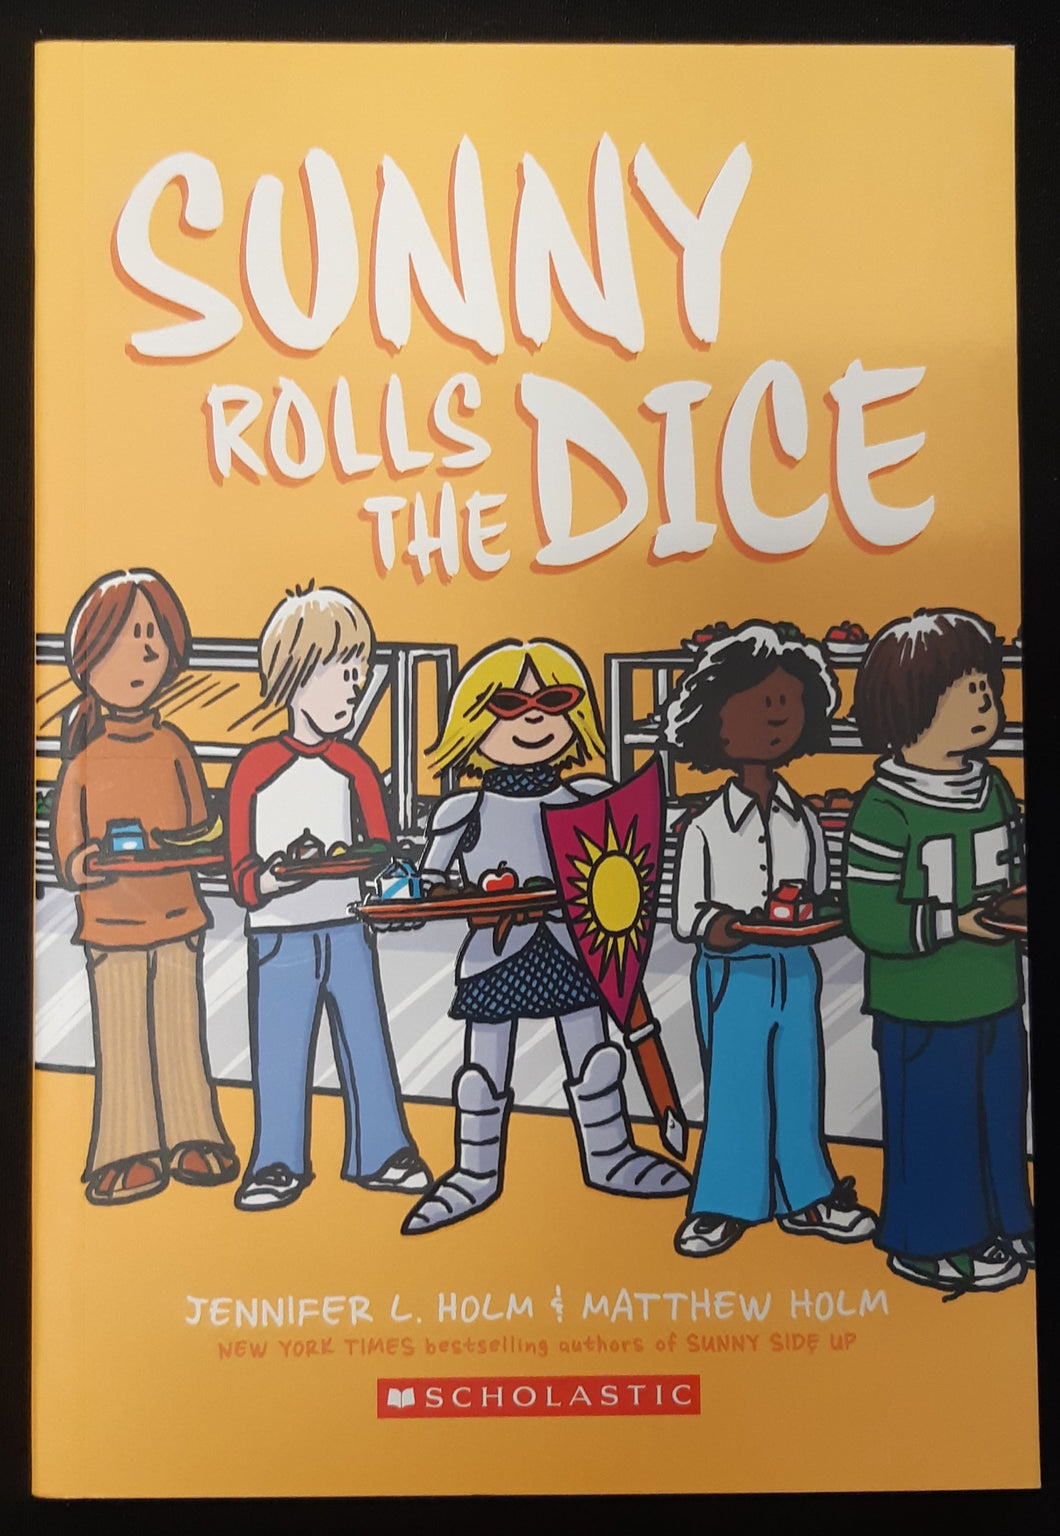 Sunny Rolls the Dice: A Graphic Novel (Sunny #3) by Jennifer L. Holm & Matthew Holm